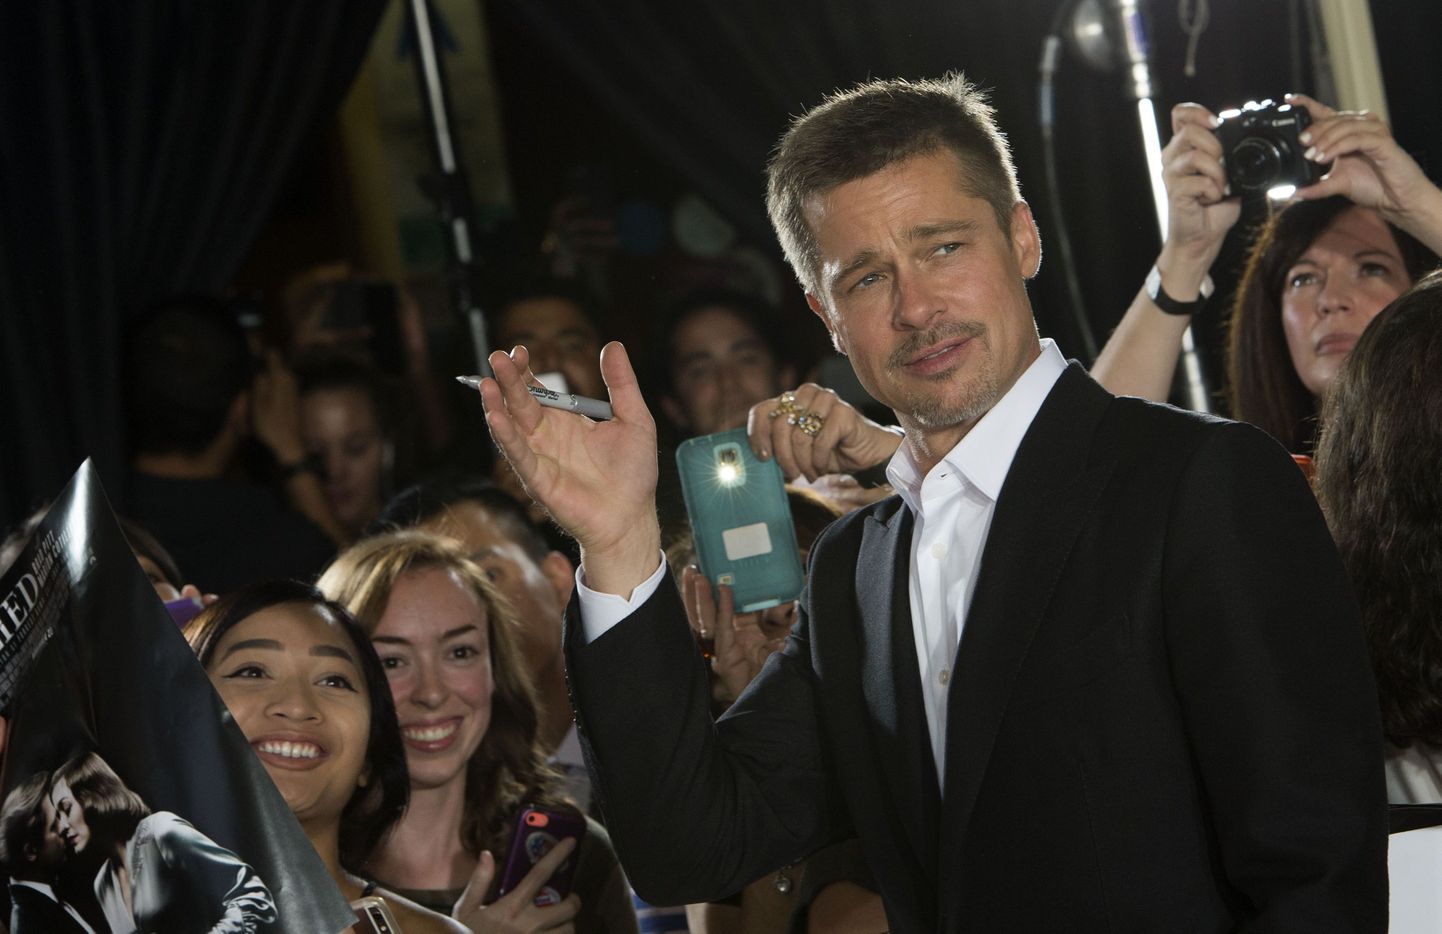 Actor Brad Pitt  attends The "Allied" Fan Event Presented by Paramount Pictures, in Westwood, California, on November 9, 2016. / AFP PHOTO / VALERIE MACON